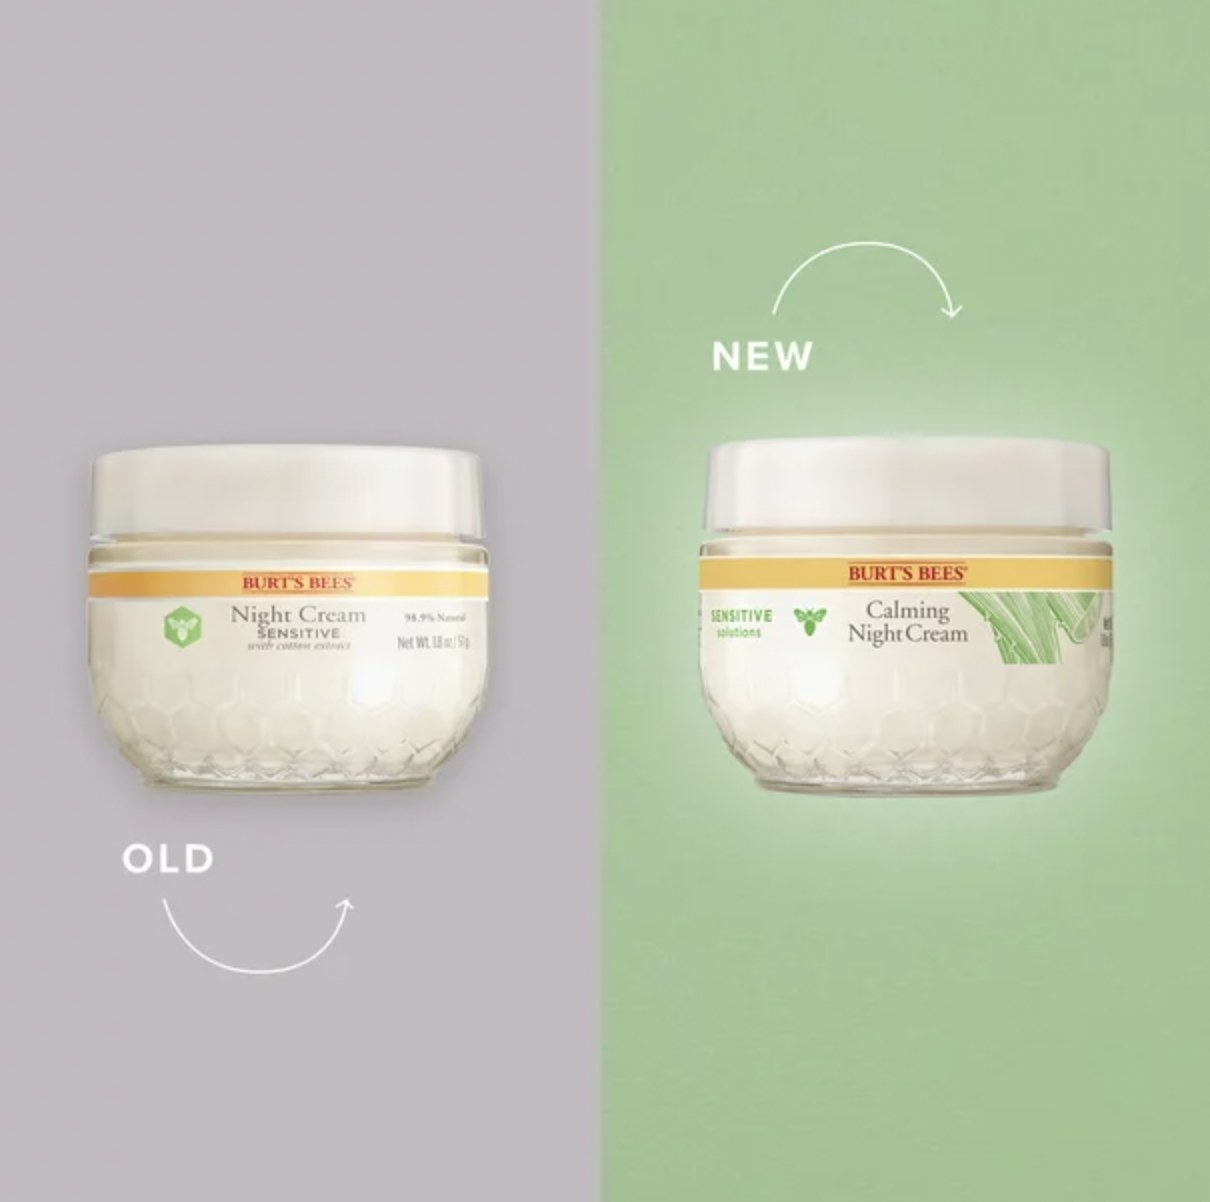 A old and new jar of the same face cream